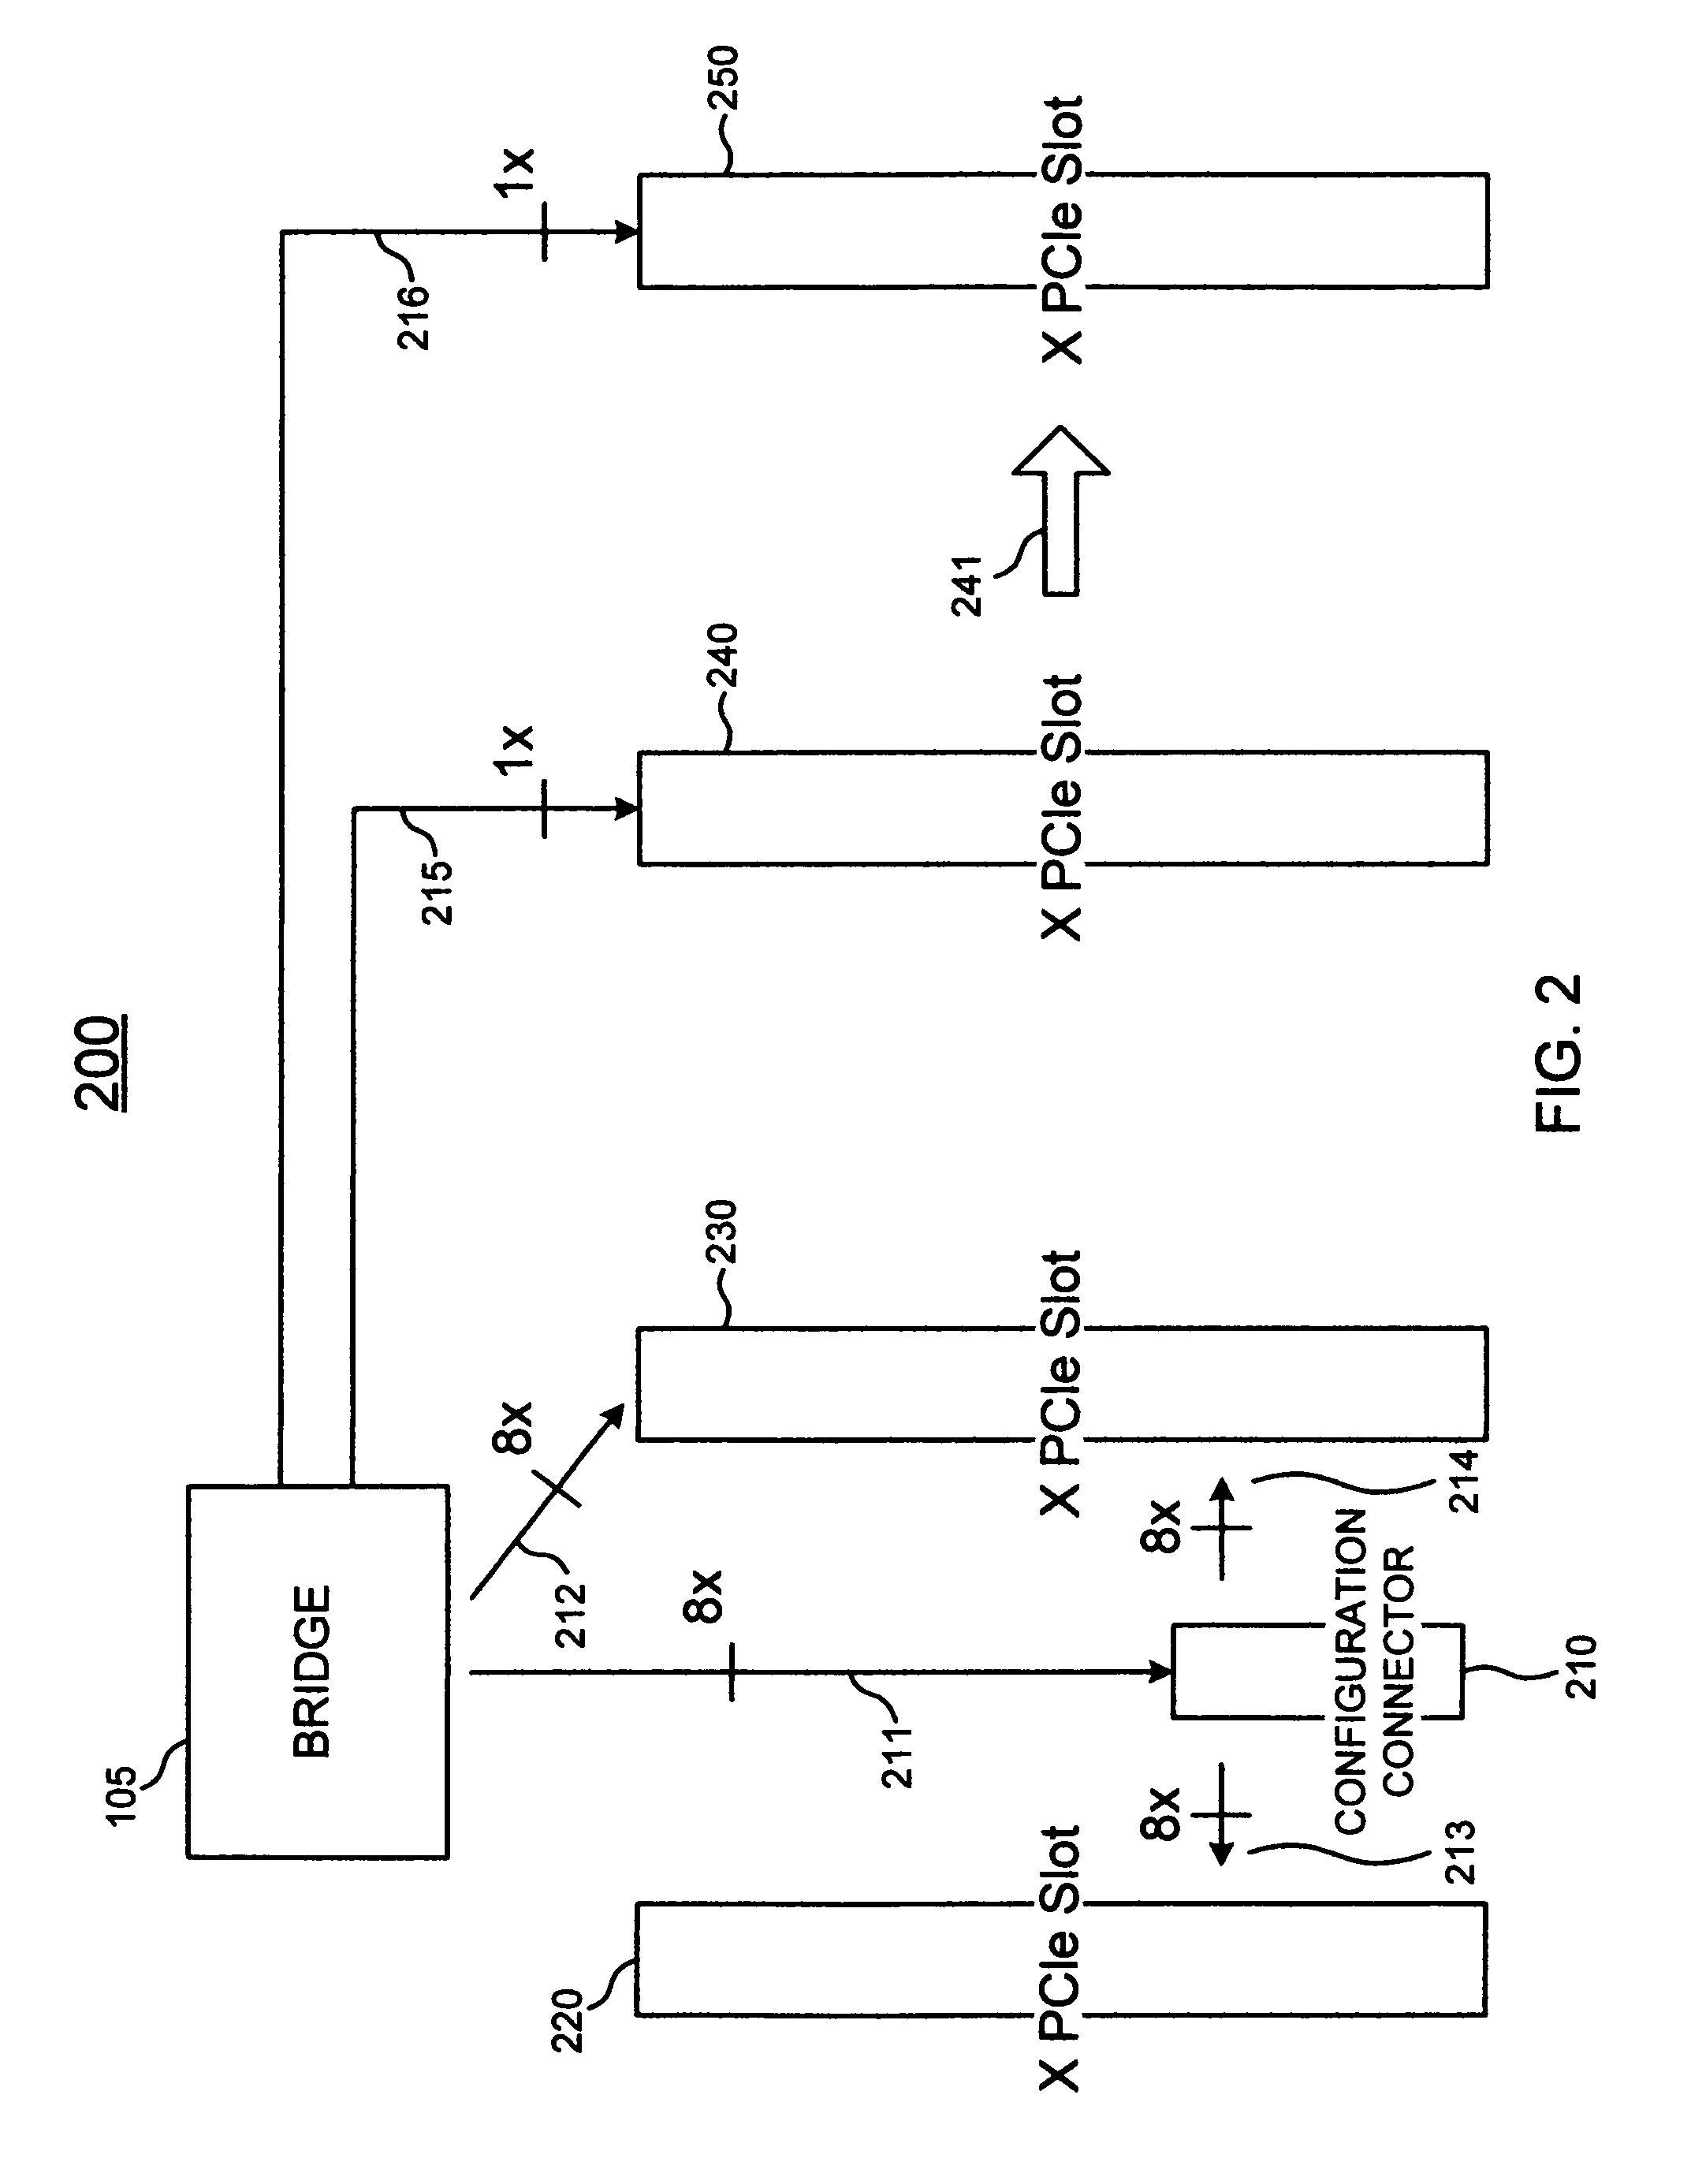 Translation device apparatus for configuring printed circuit board connectors